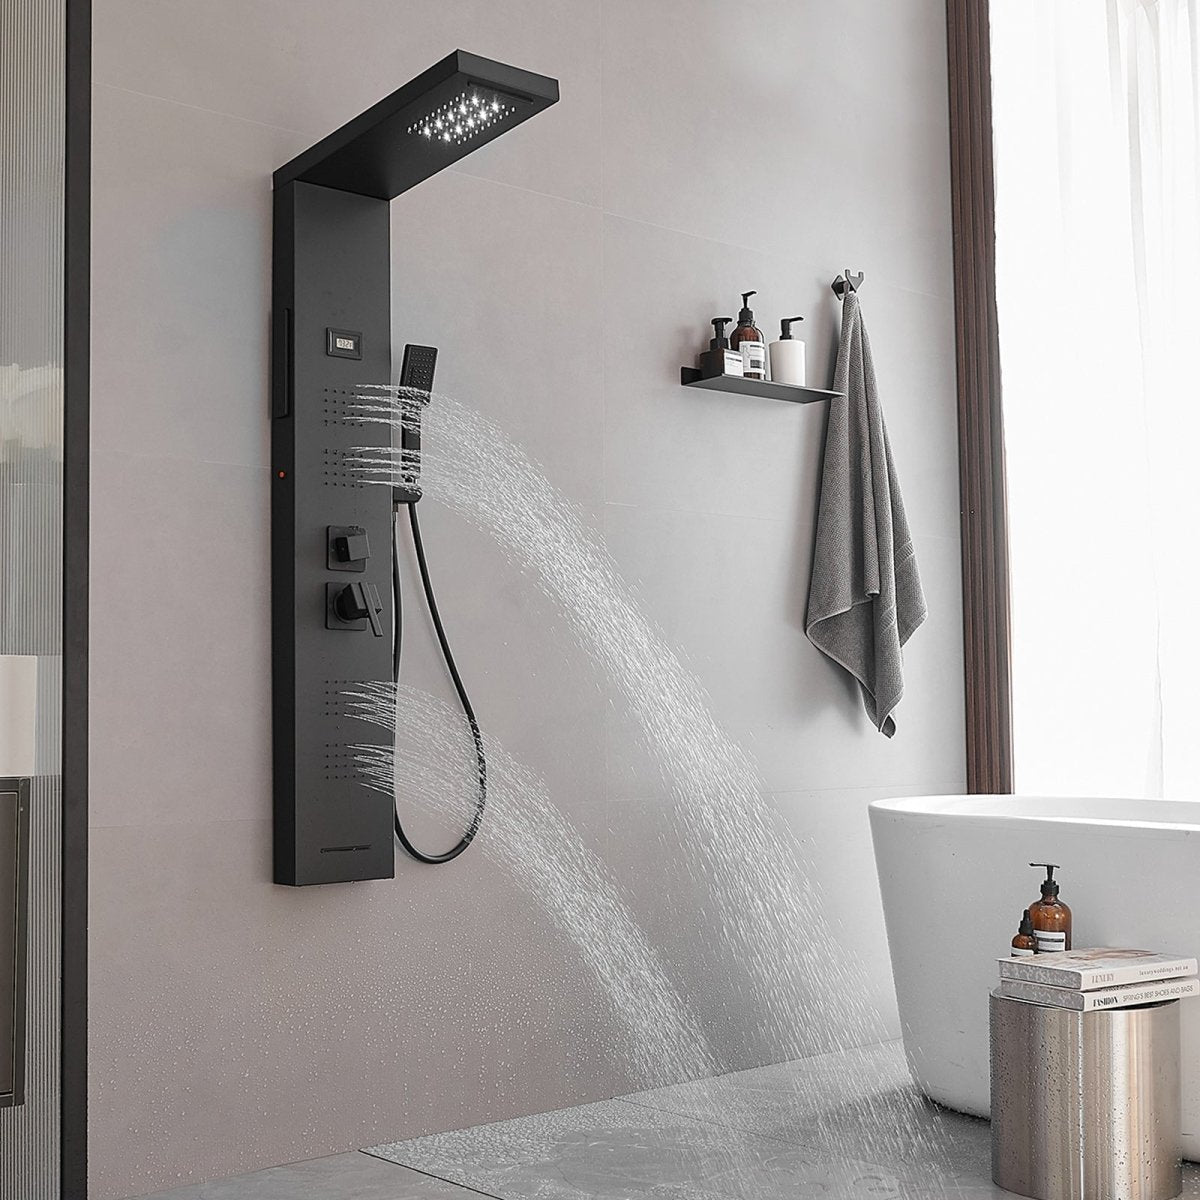 4-Jet Rainfall Shower Panel System in Stainless Steel Black - buyfaucet.com